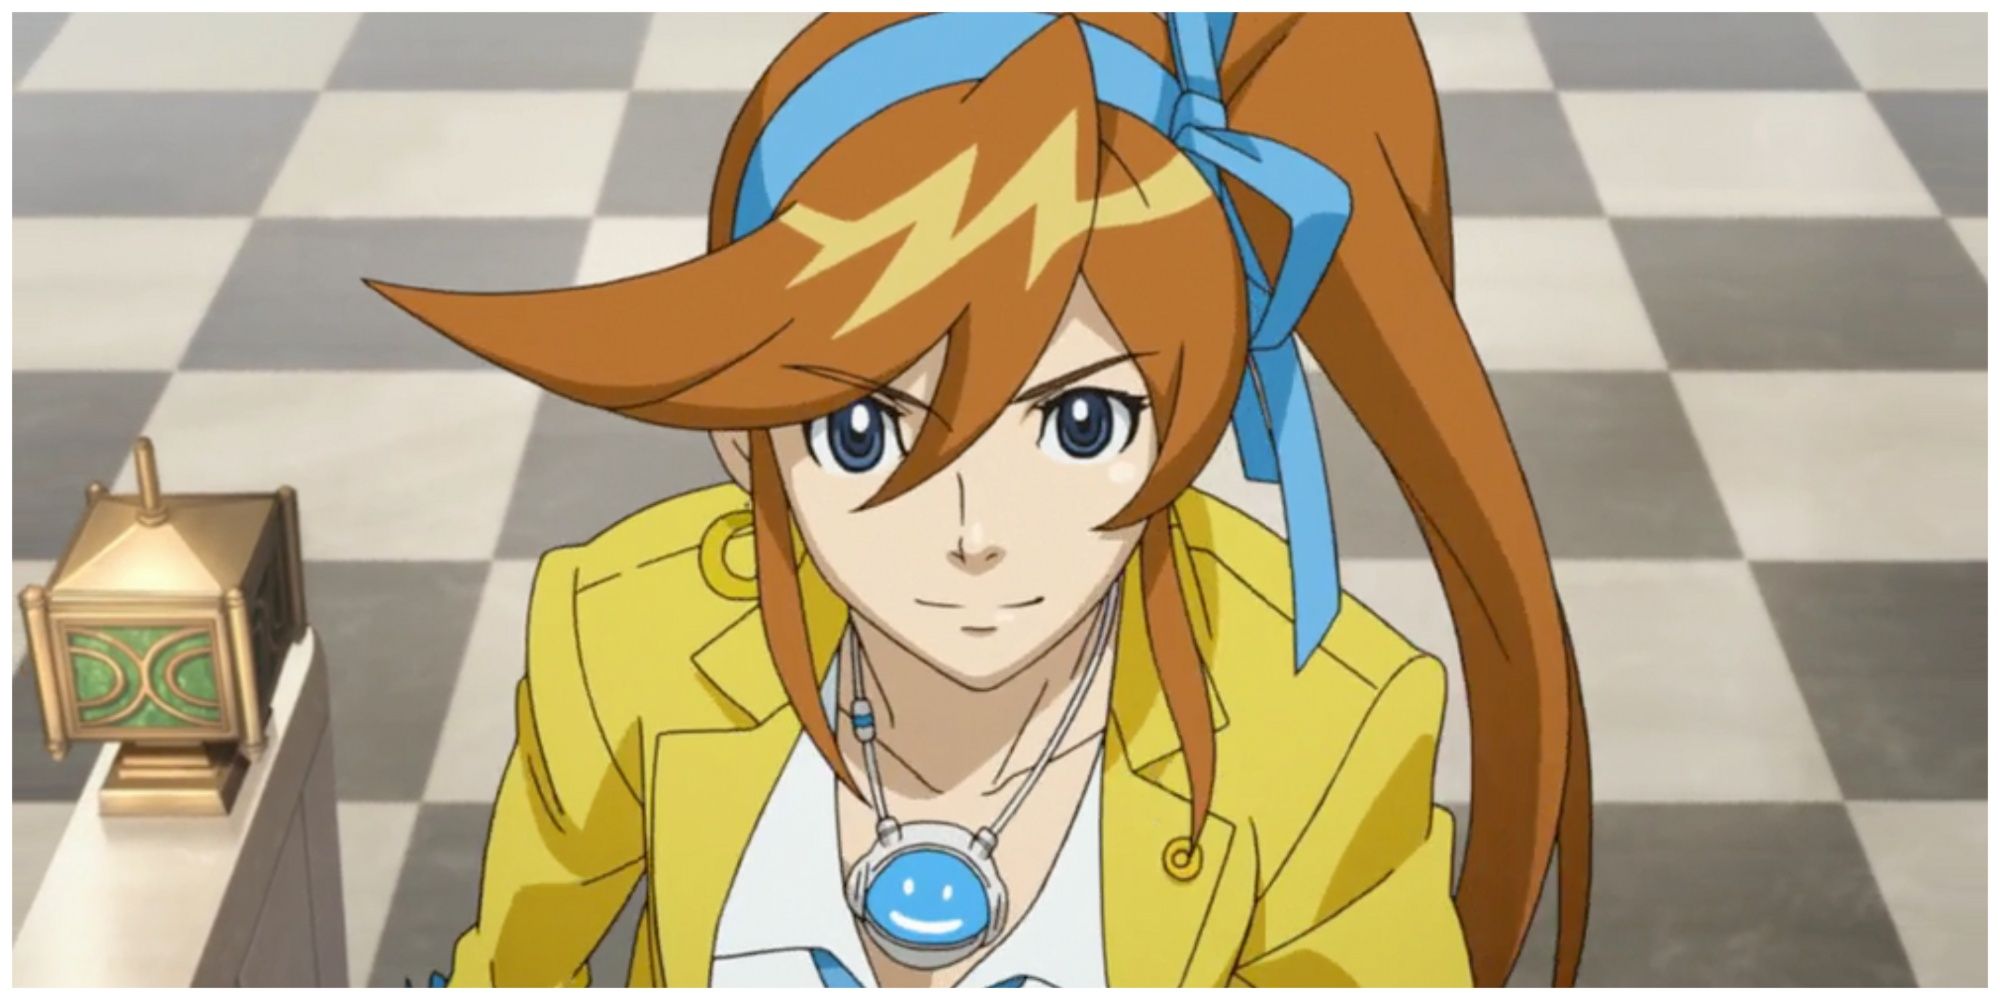 Athena Cykes smiling in a cutscene for Dual Destinies